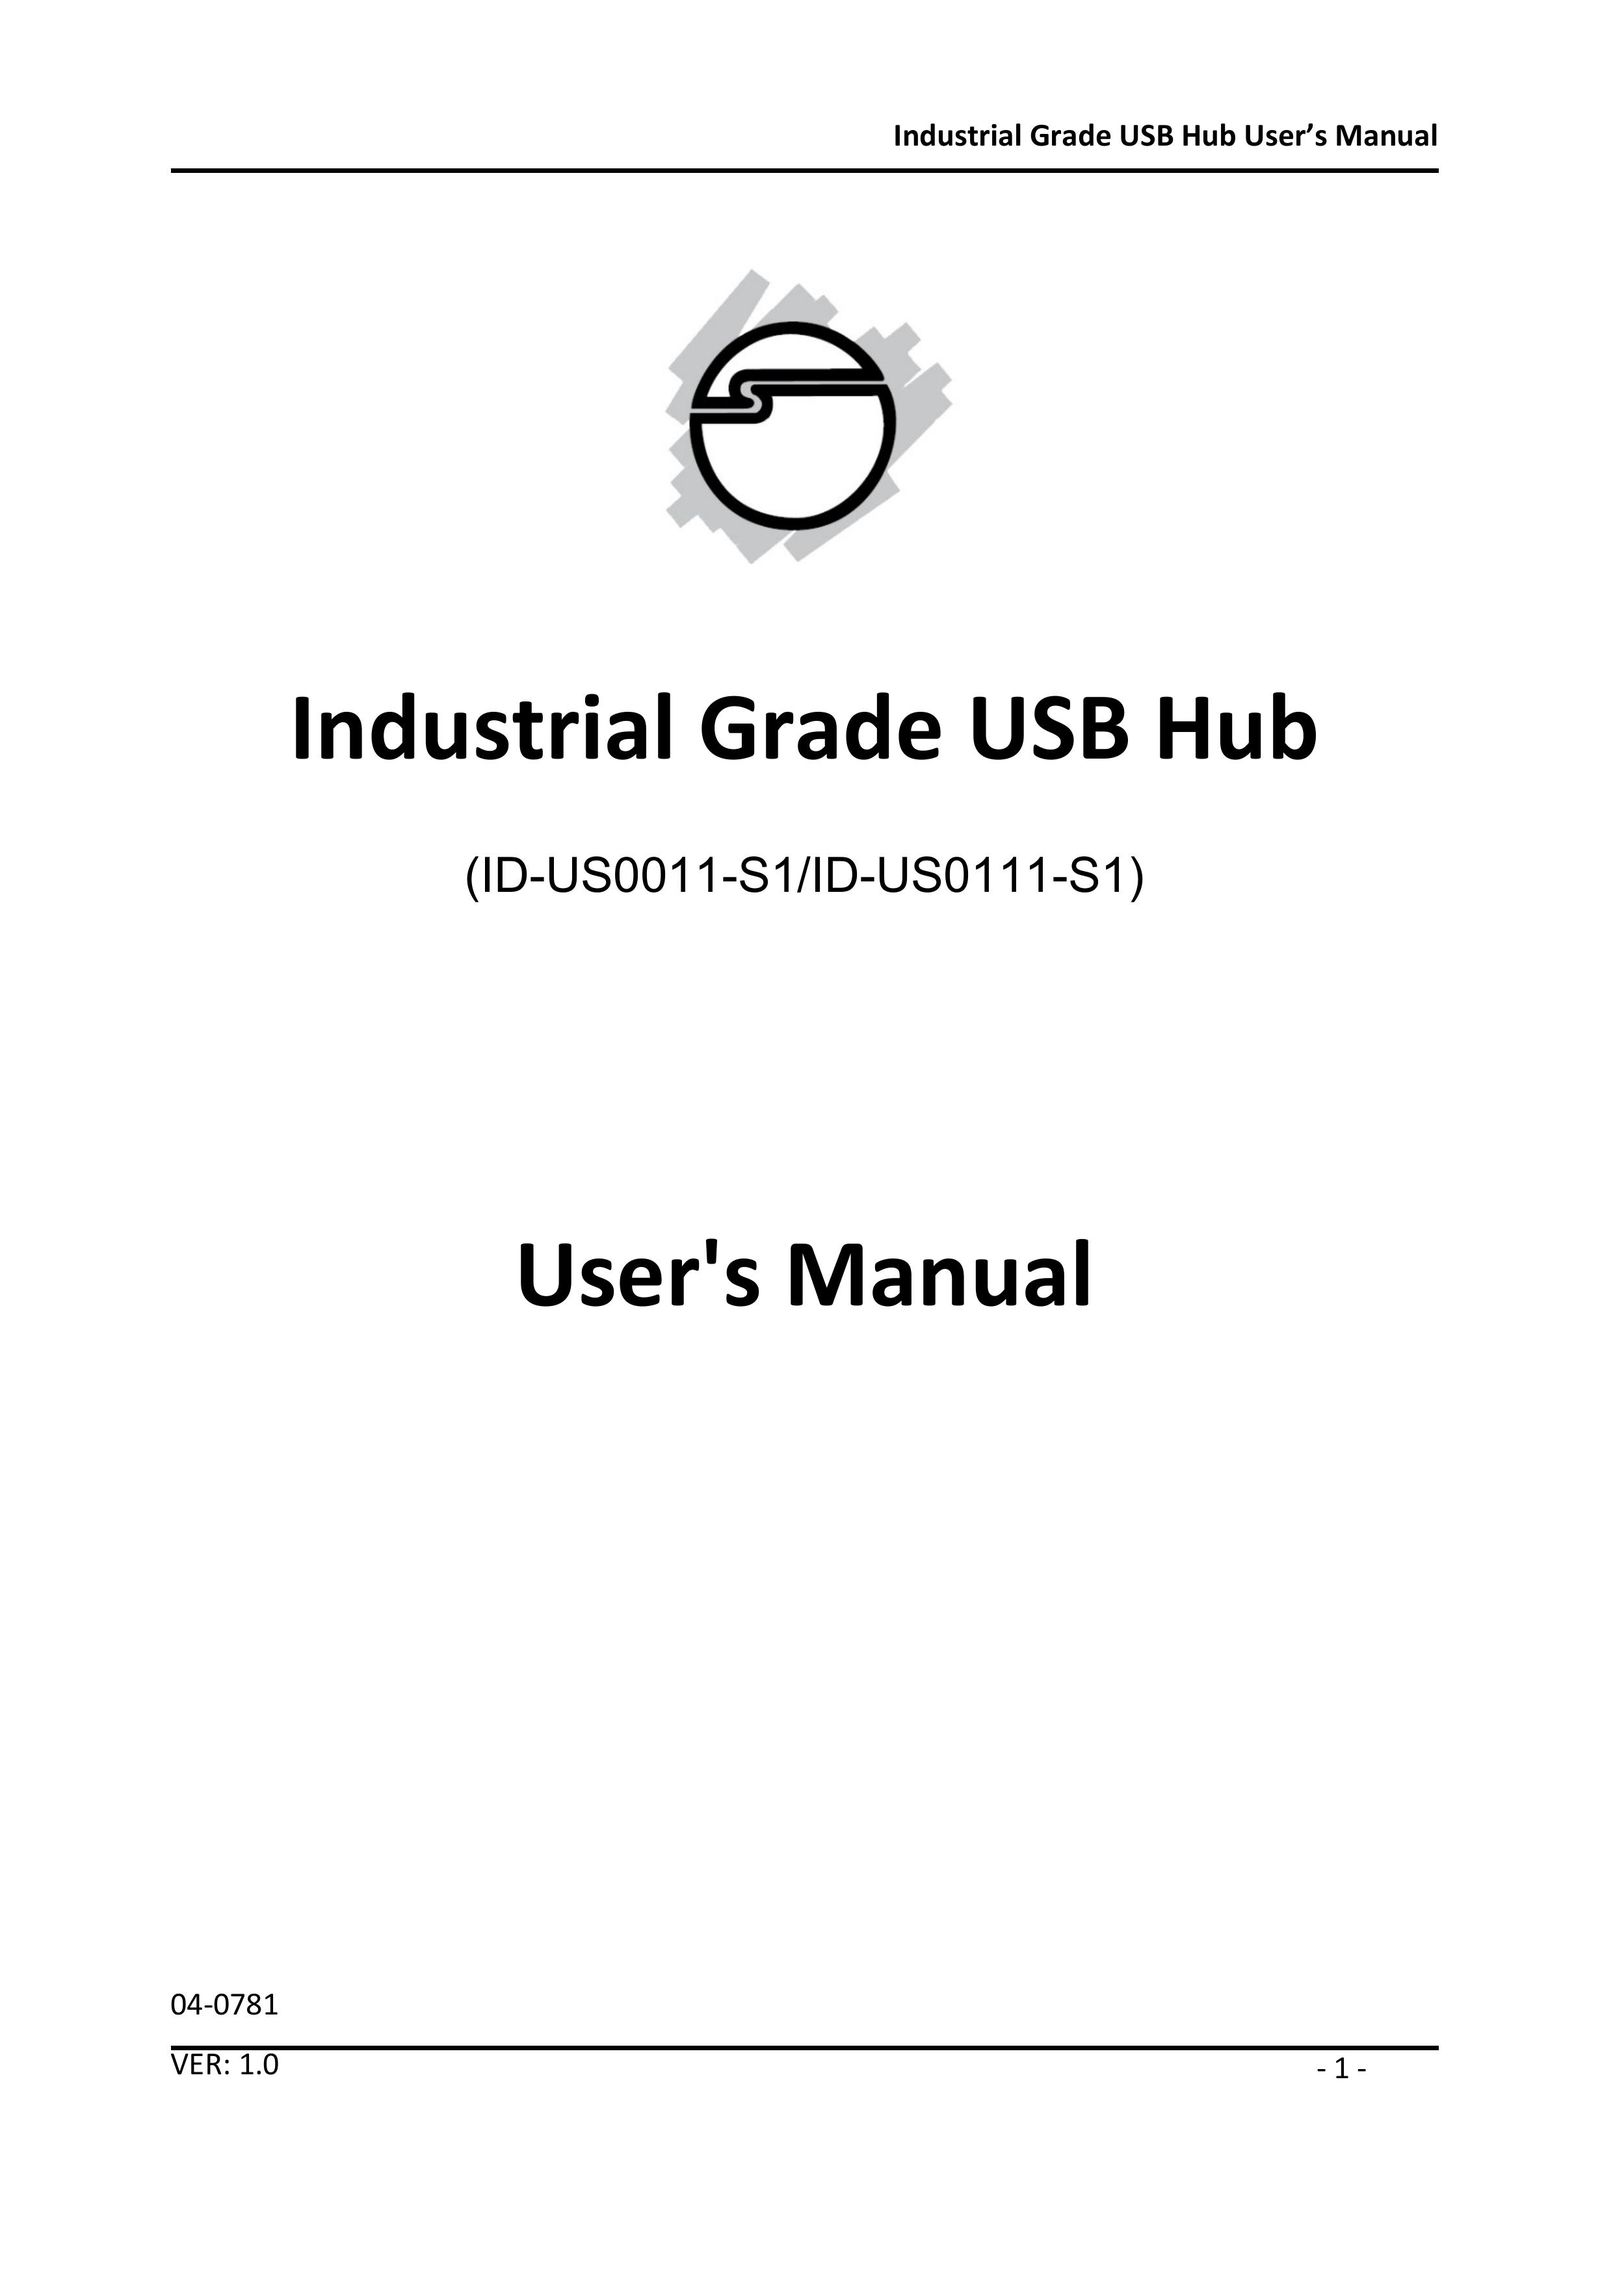 SIIG ID-US0011-S1 Switch User Manual